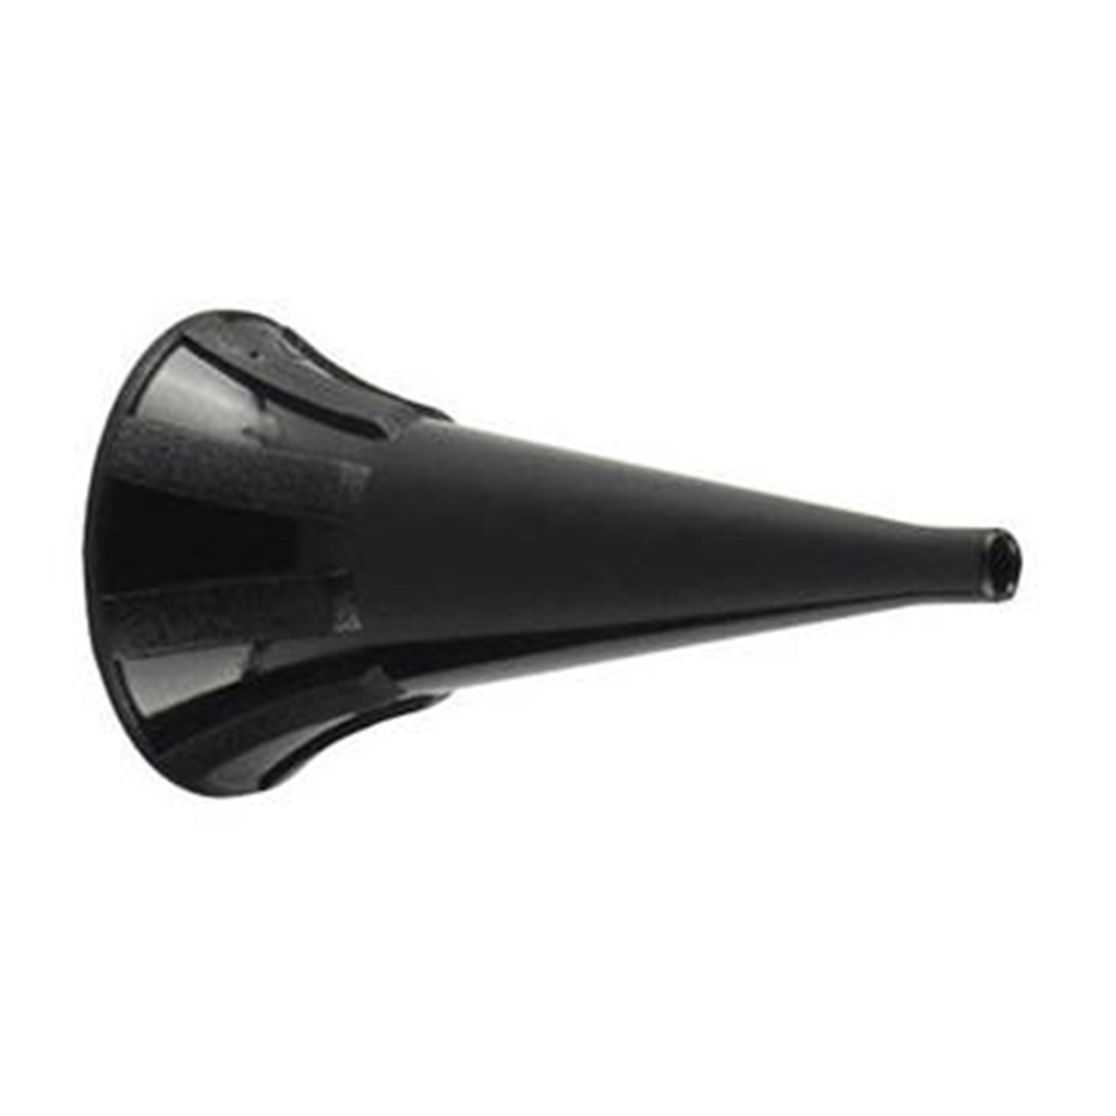 Riester Disposable Specula, Black, For L1/L2 Otoscope, Pack of 1000